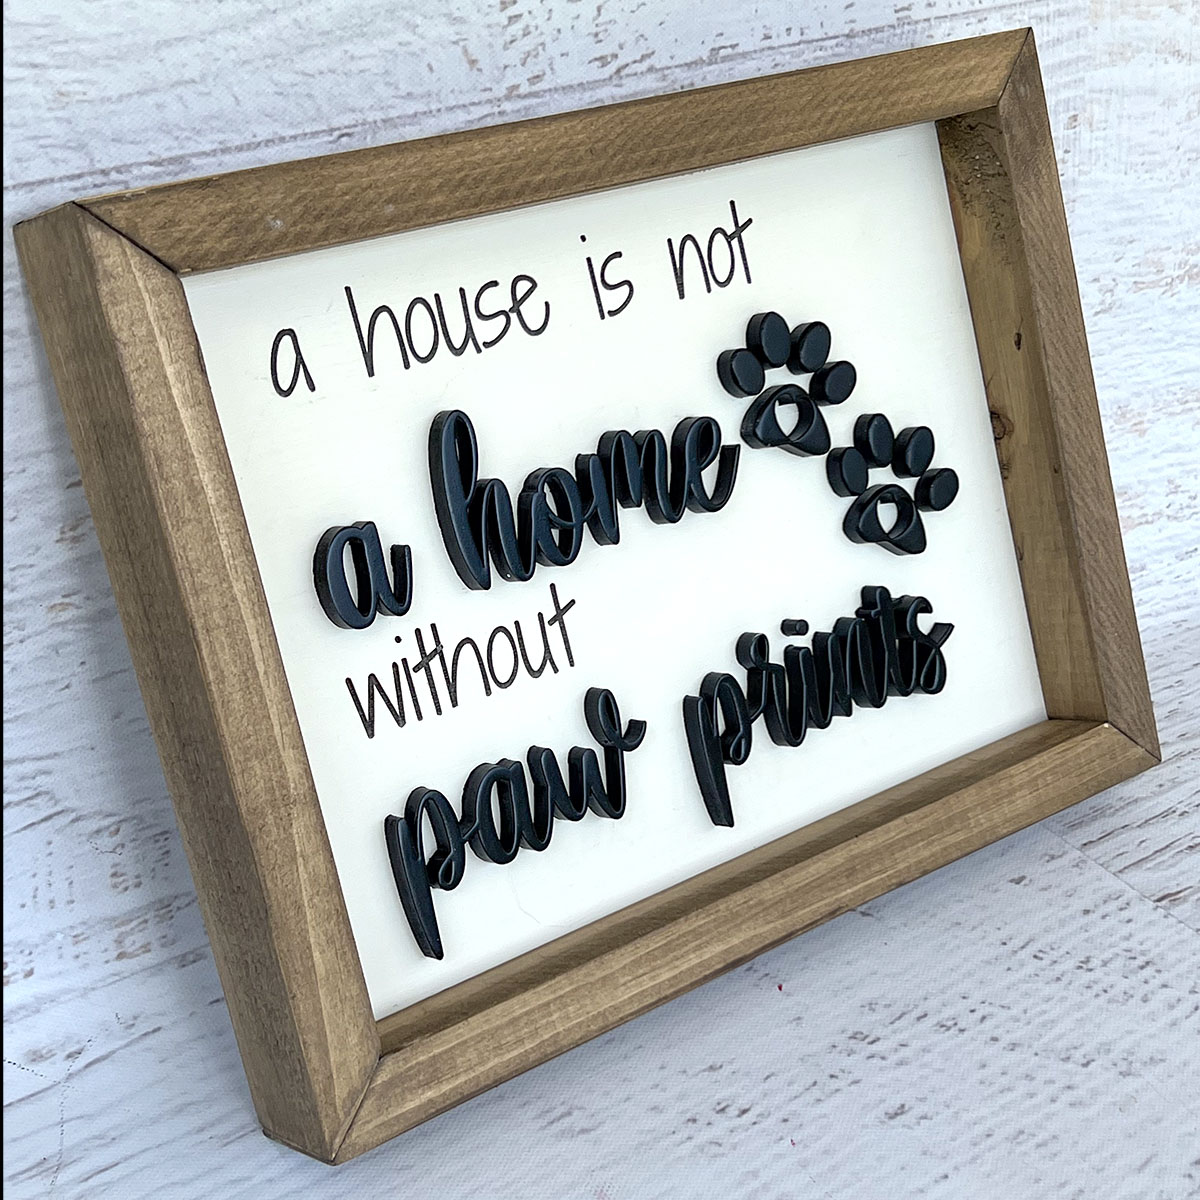 A house is not a home without paw prints